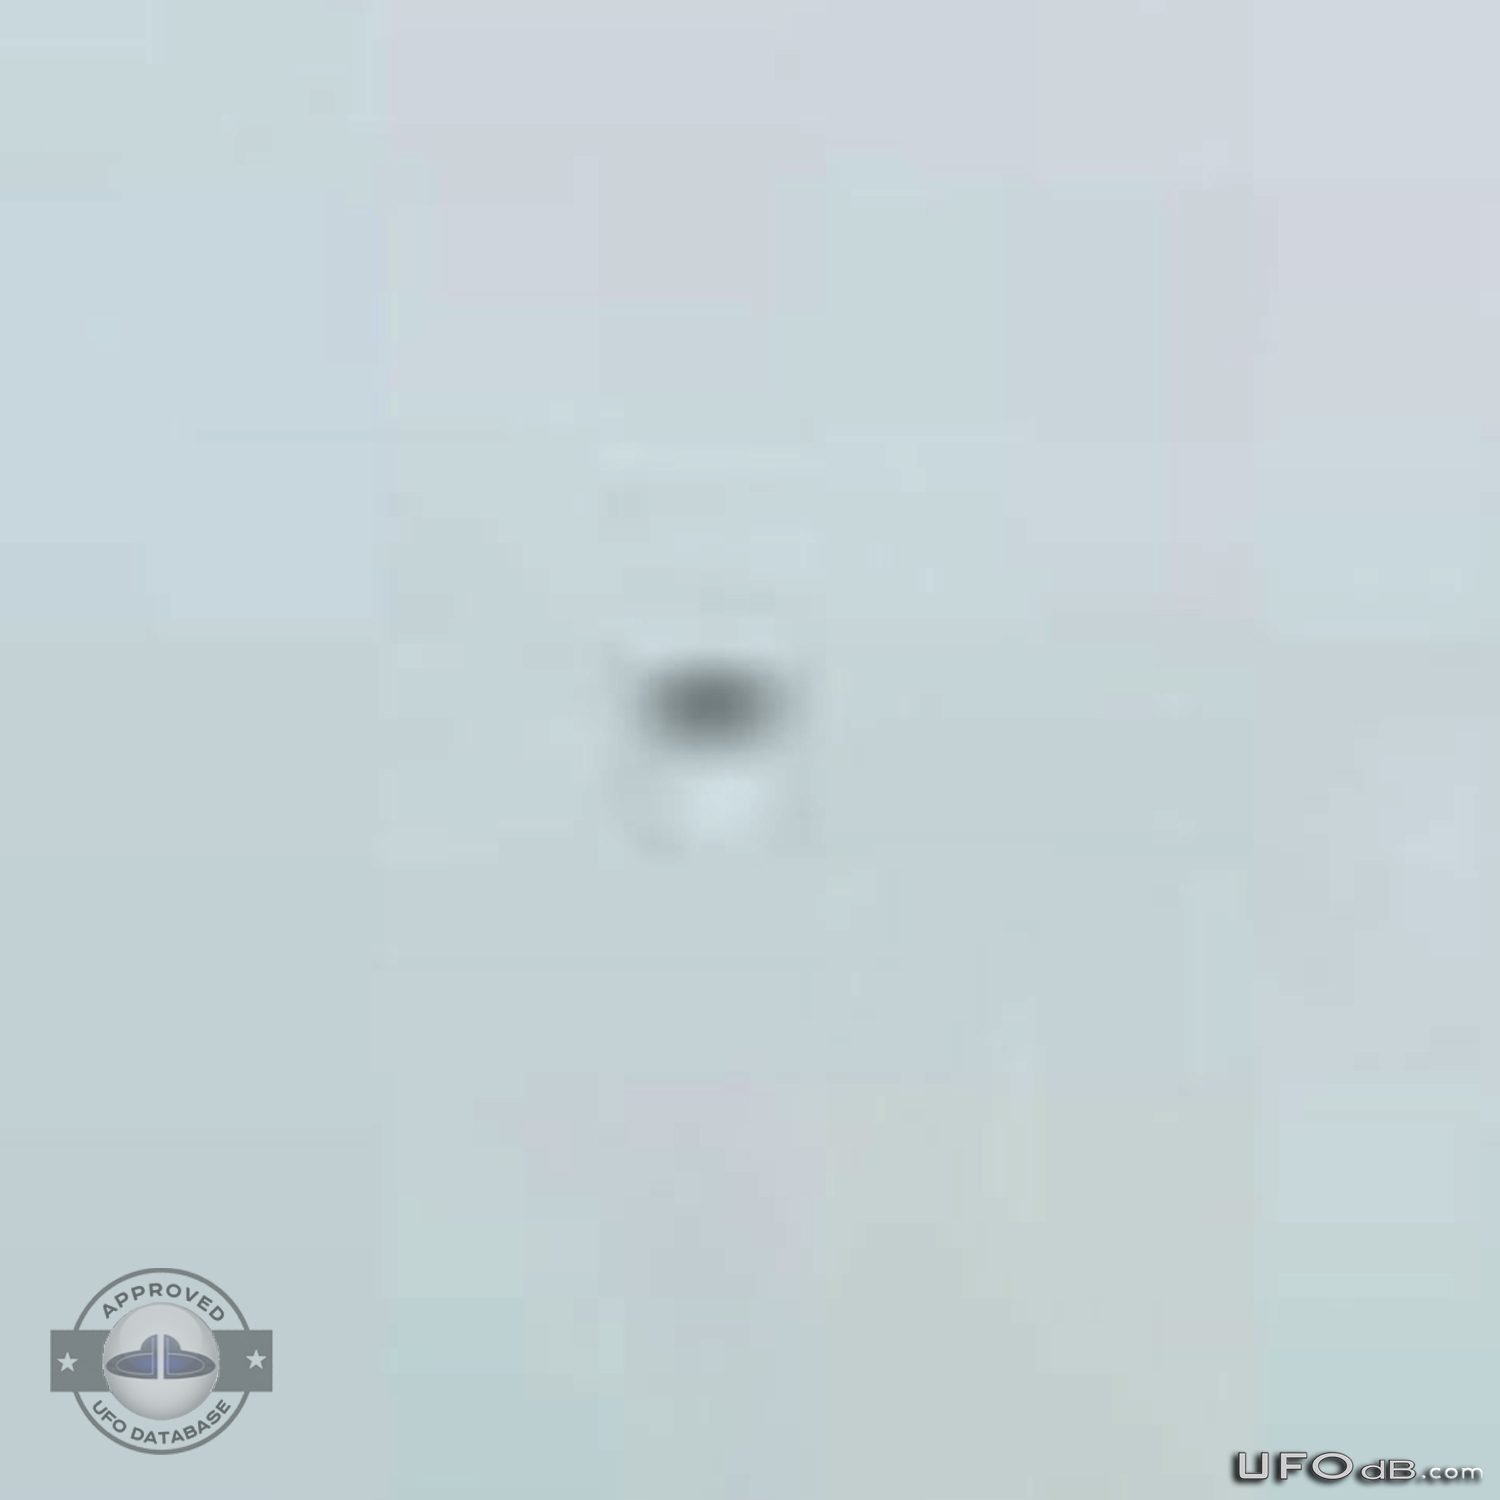 UFO caught on picture near the Resort World Sentosa in Singapore 2010 UFO Picture #393-4